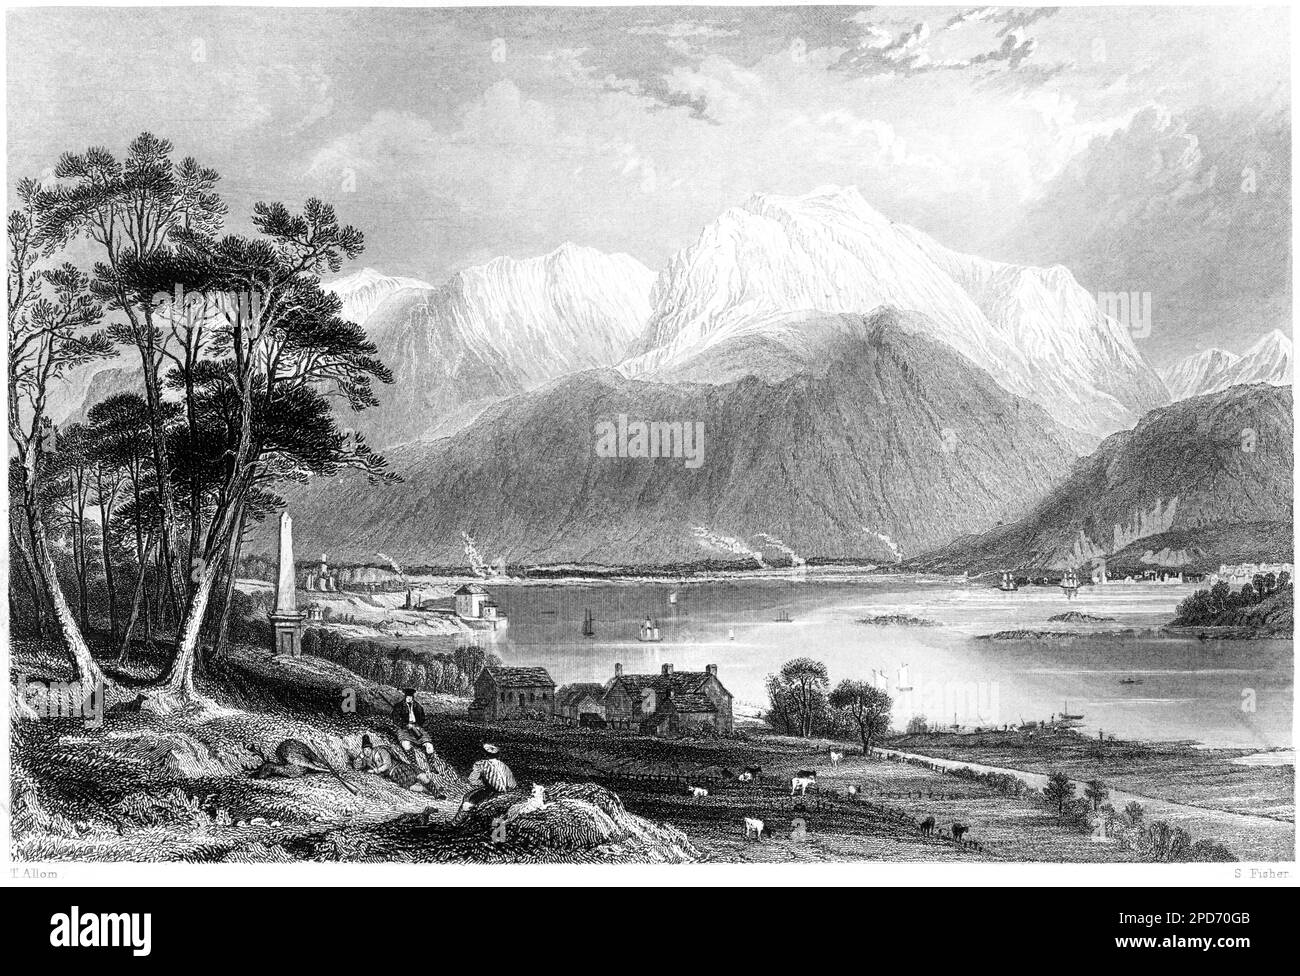 An engraving of Ben Nevis and the Entrance to the Caledonian Canal, Invernesshire, Scotland UK scanned at high resolution from a book printed in 1840. Stock Photo